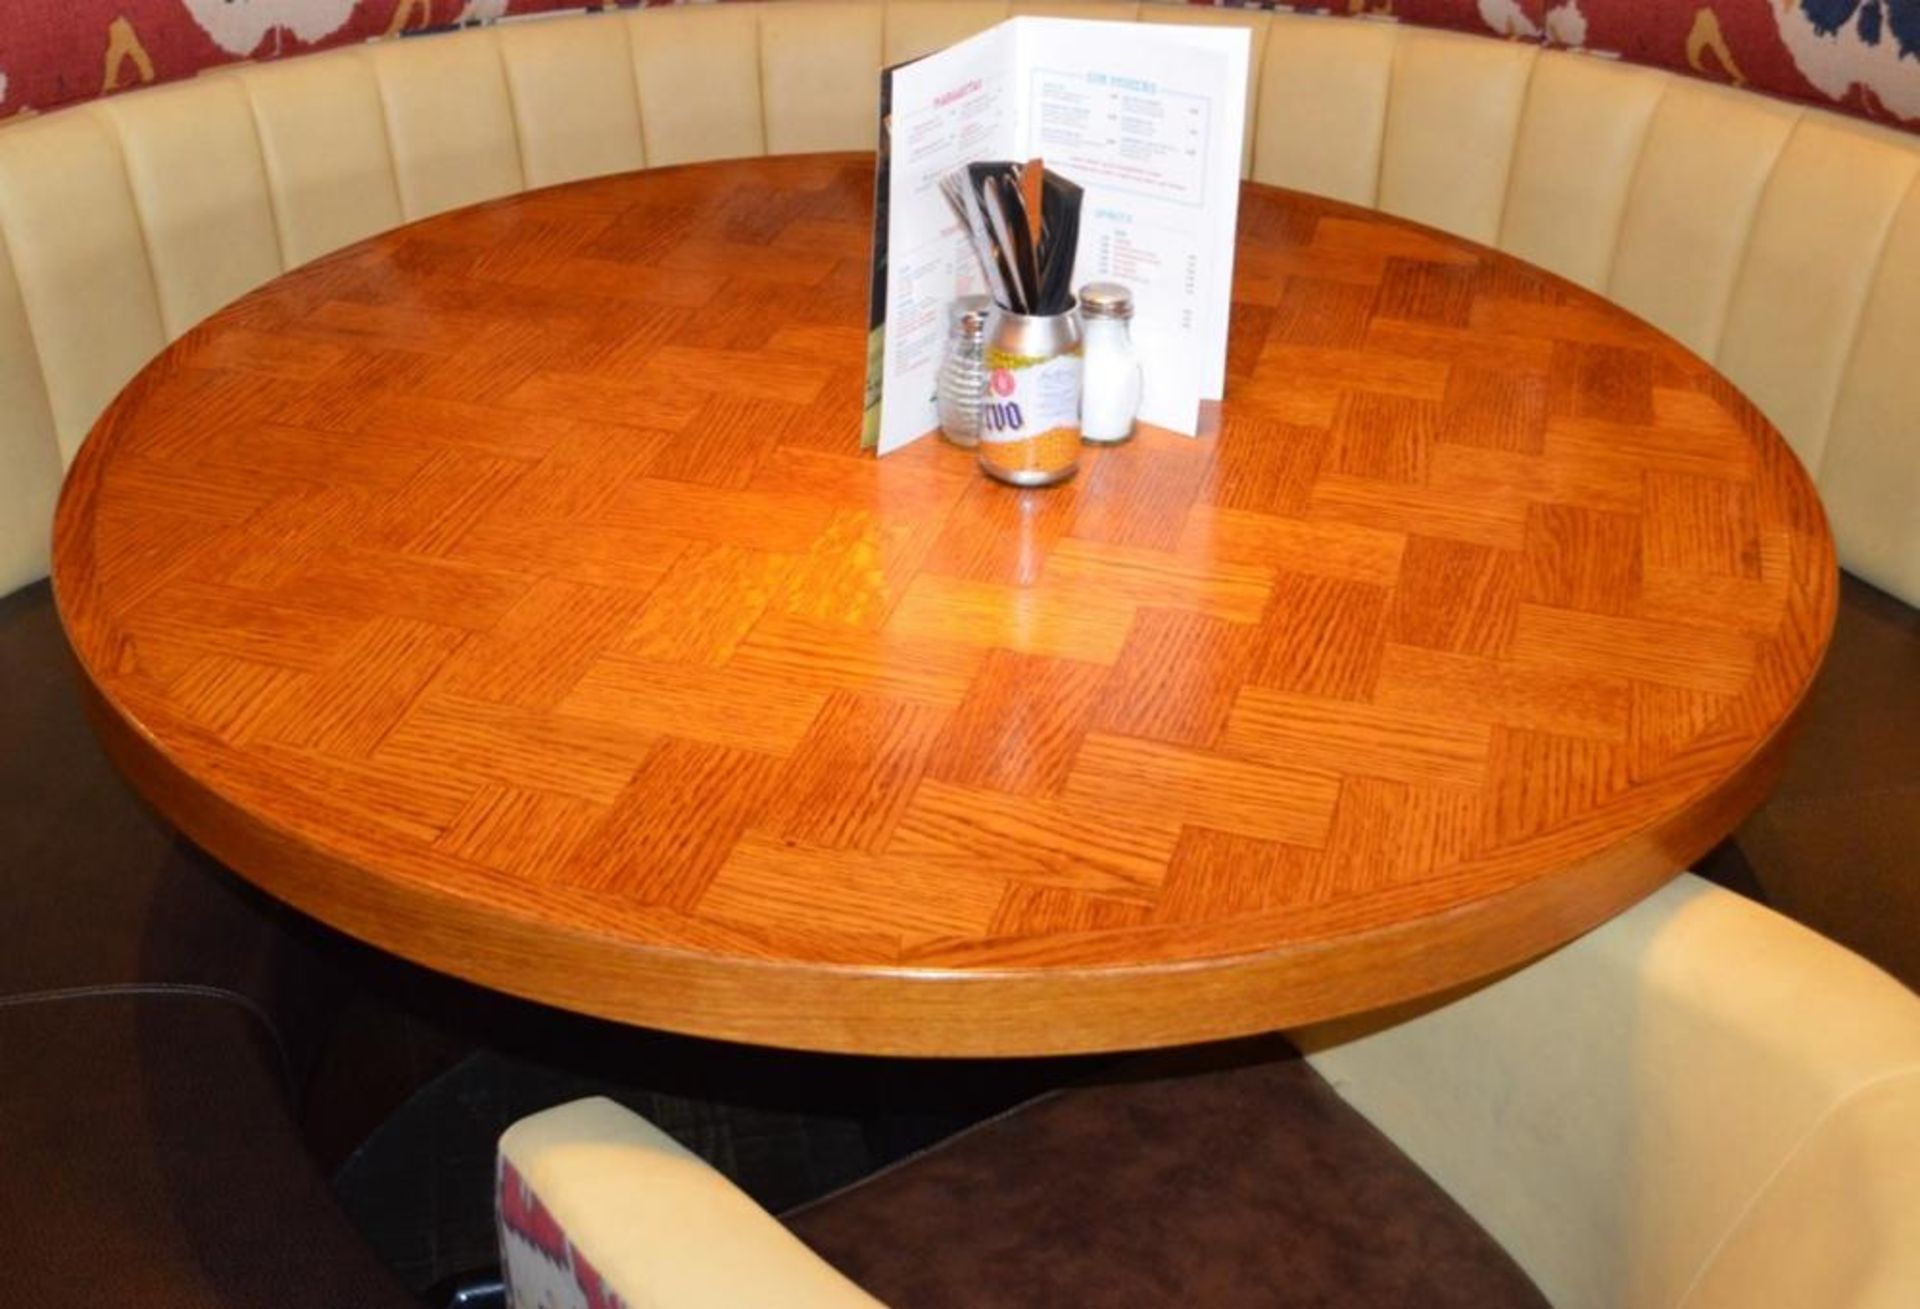 1 x Large Circular Restaurant Dining Table With Parquet Style Top and Cast Iron Base - Image 4 of 5